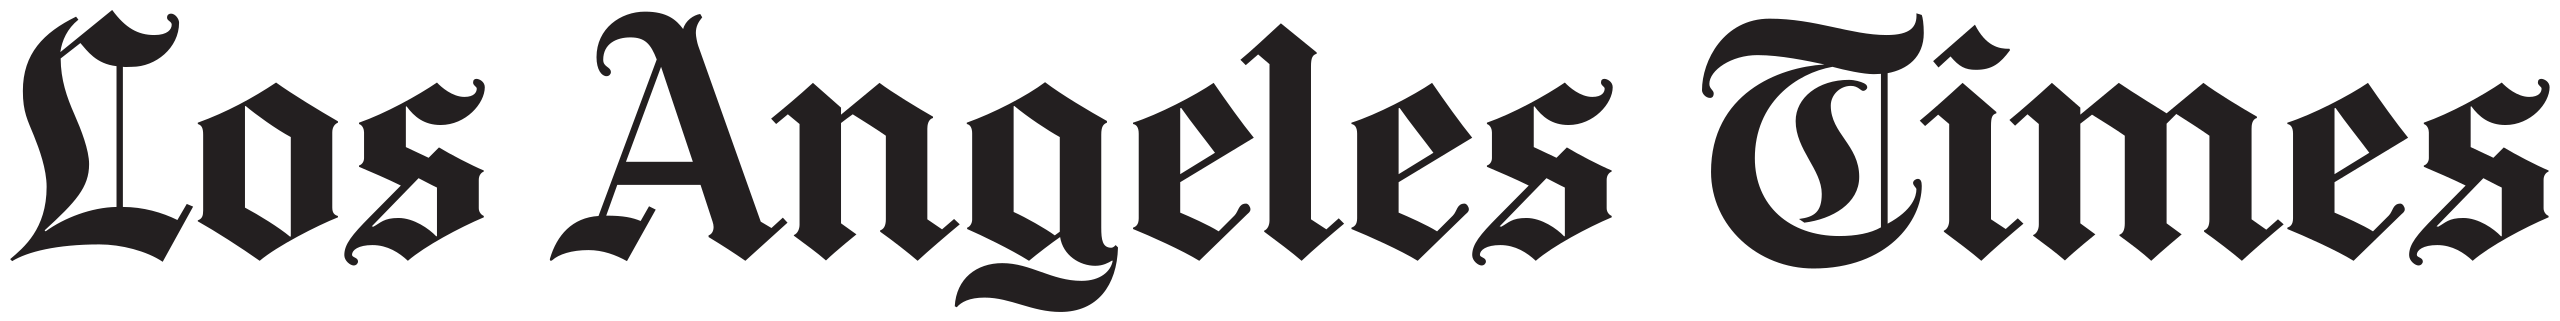 Los_Angeles_Times_logo.svg_.png